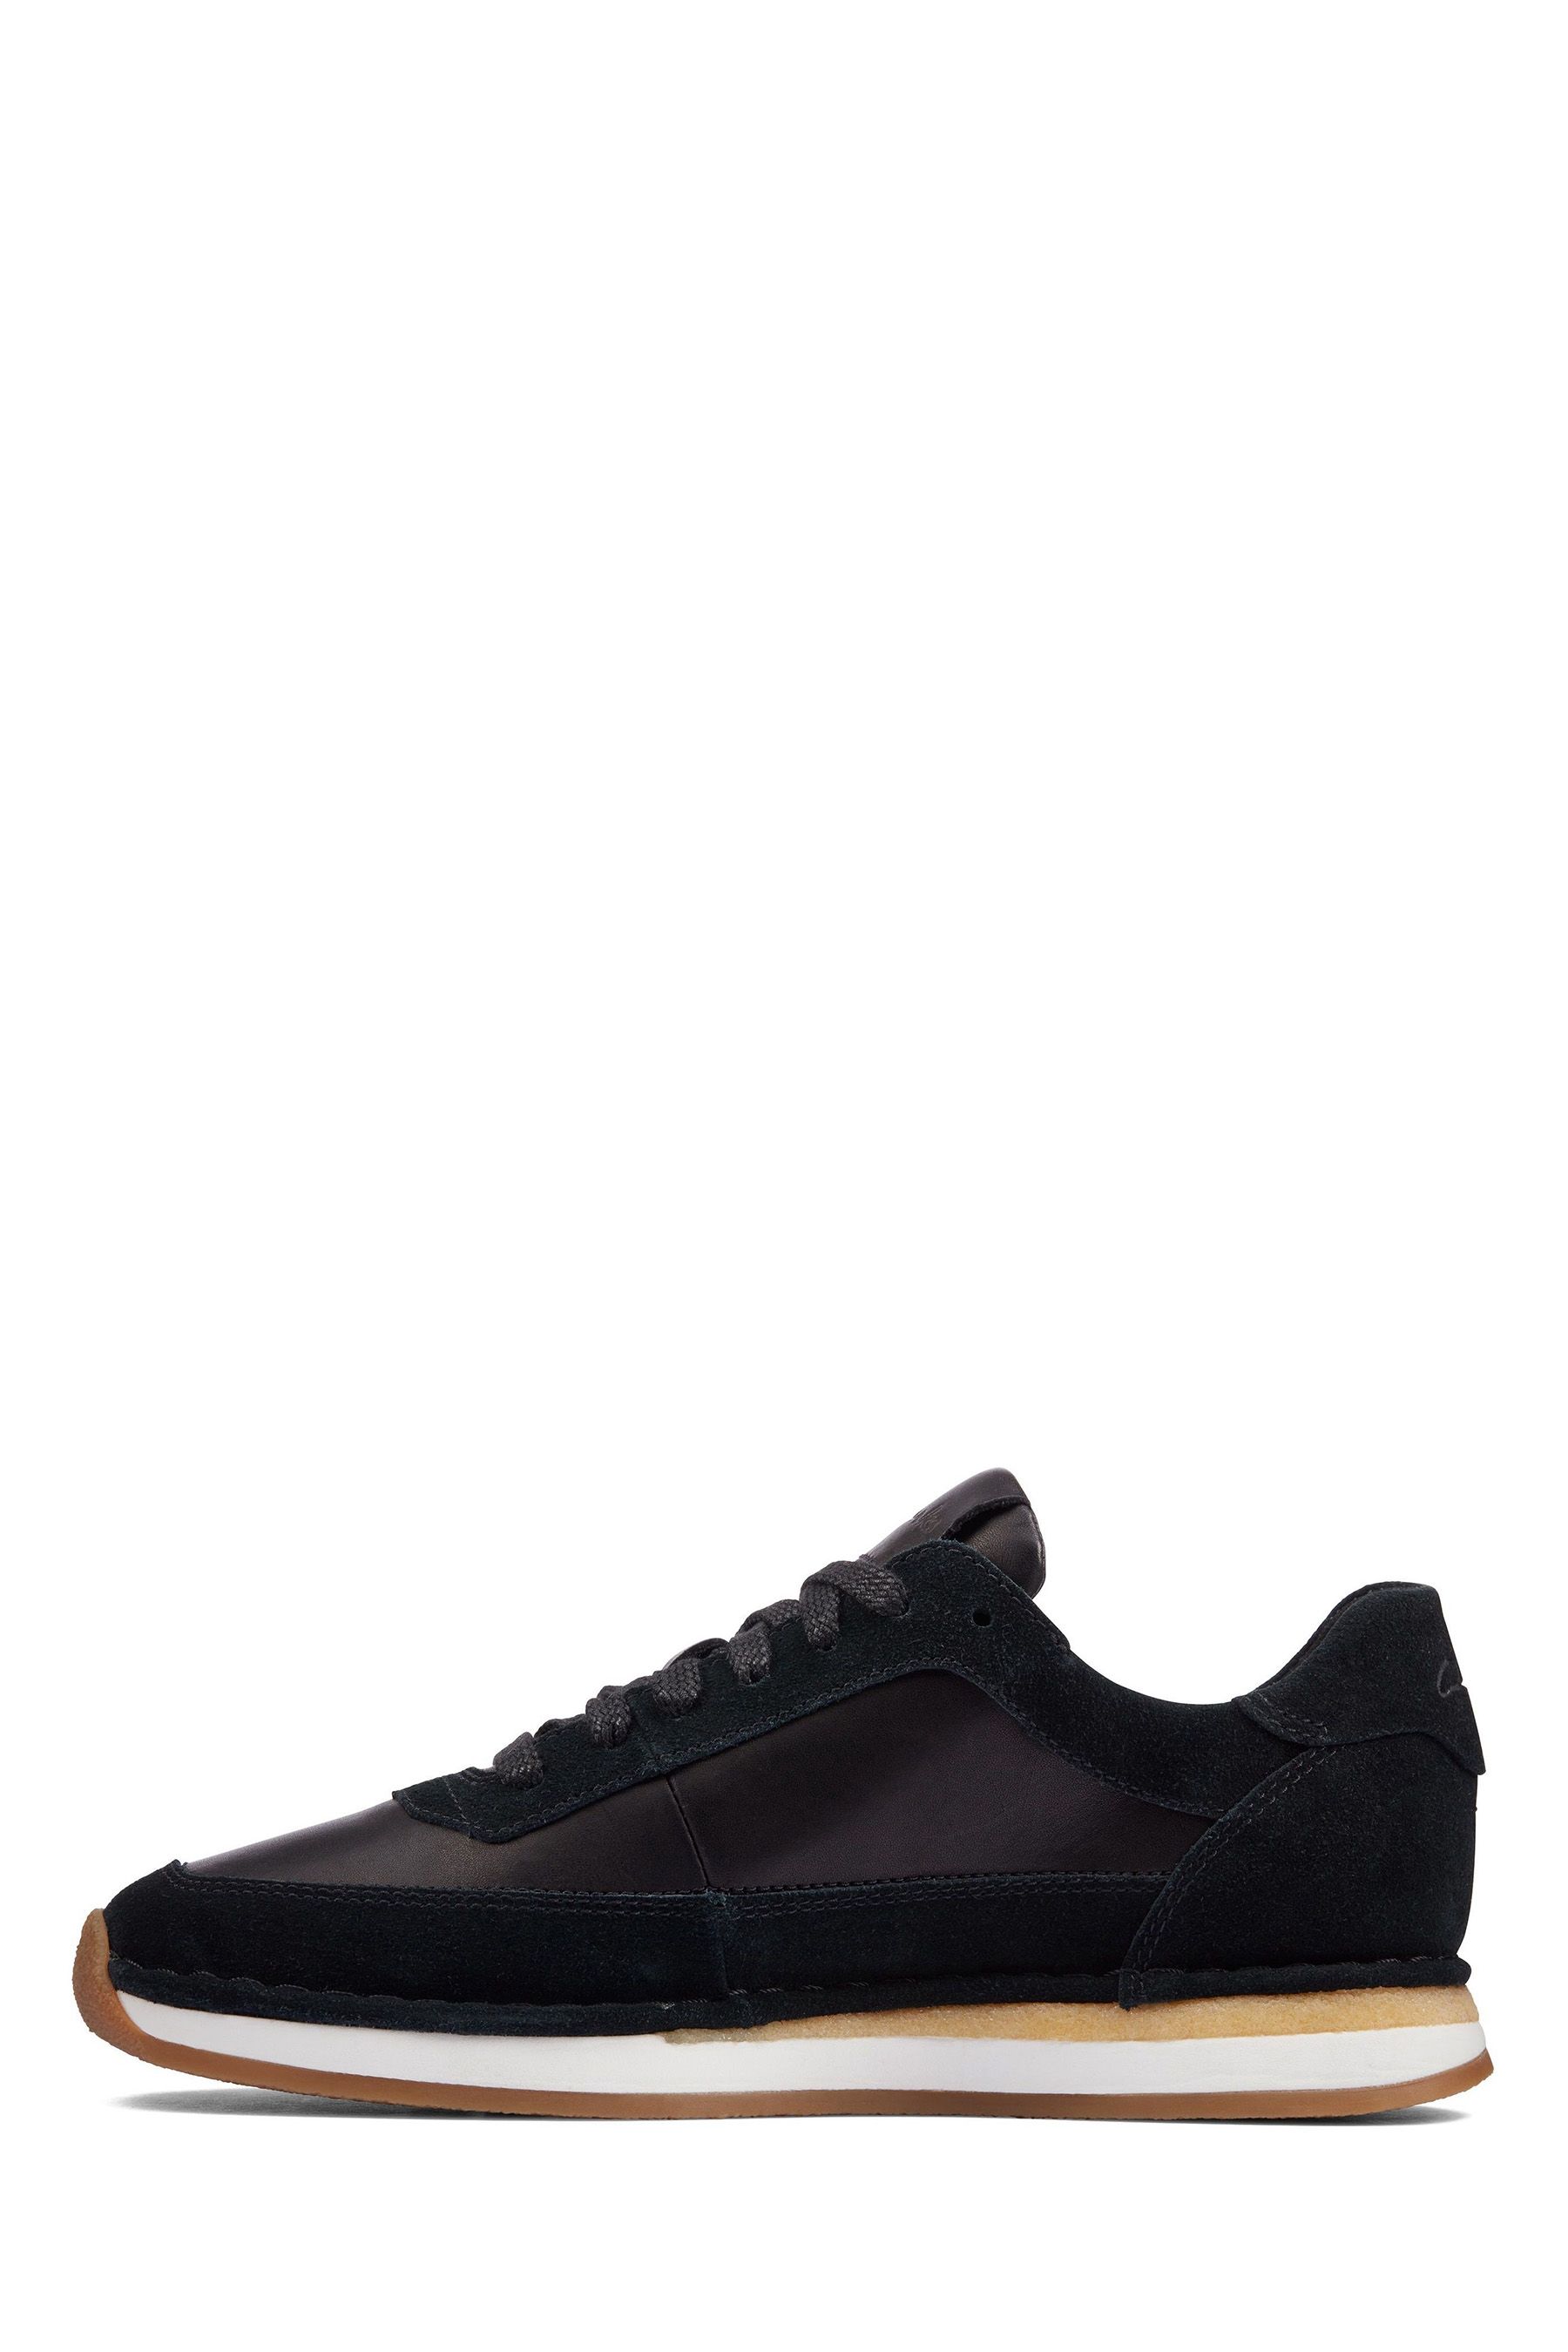 Buy Clarks Black Combi Suede CraftRun Lace Shoes from the Next UK ...